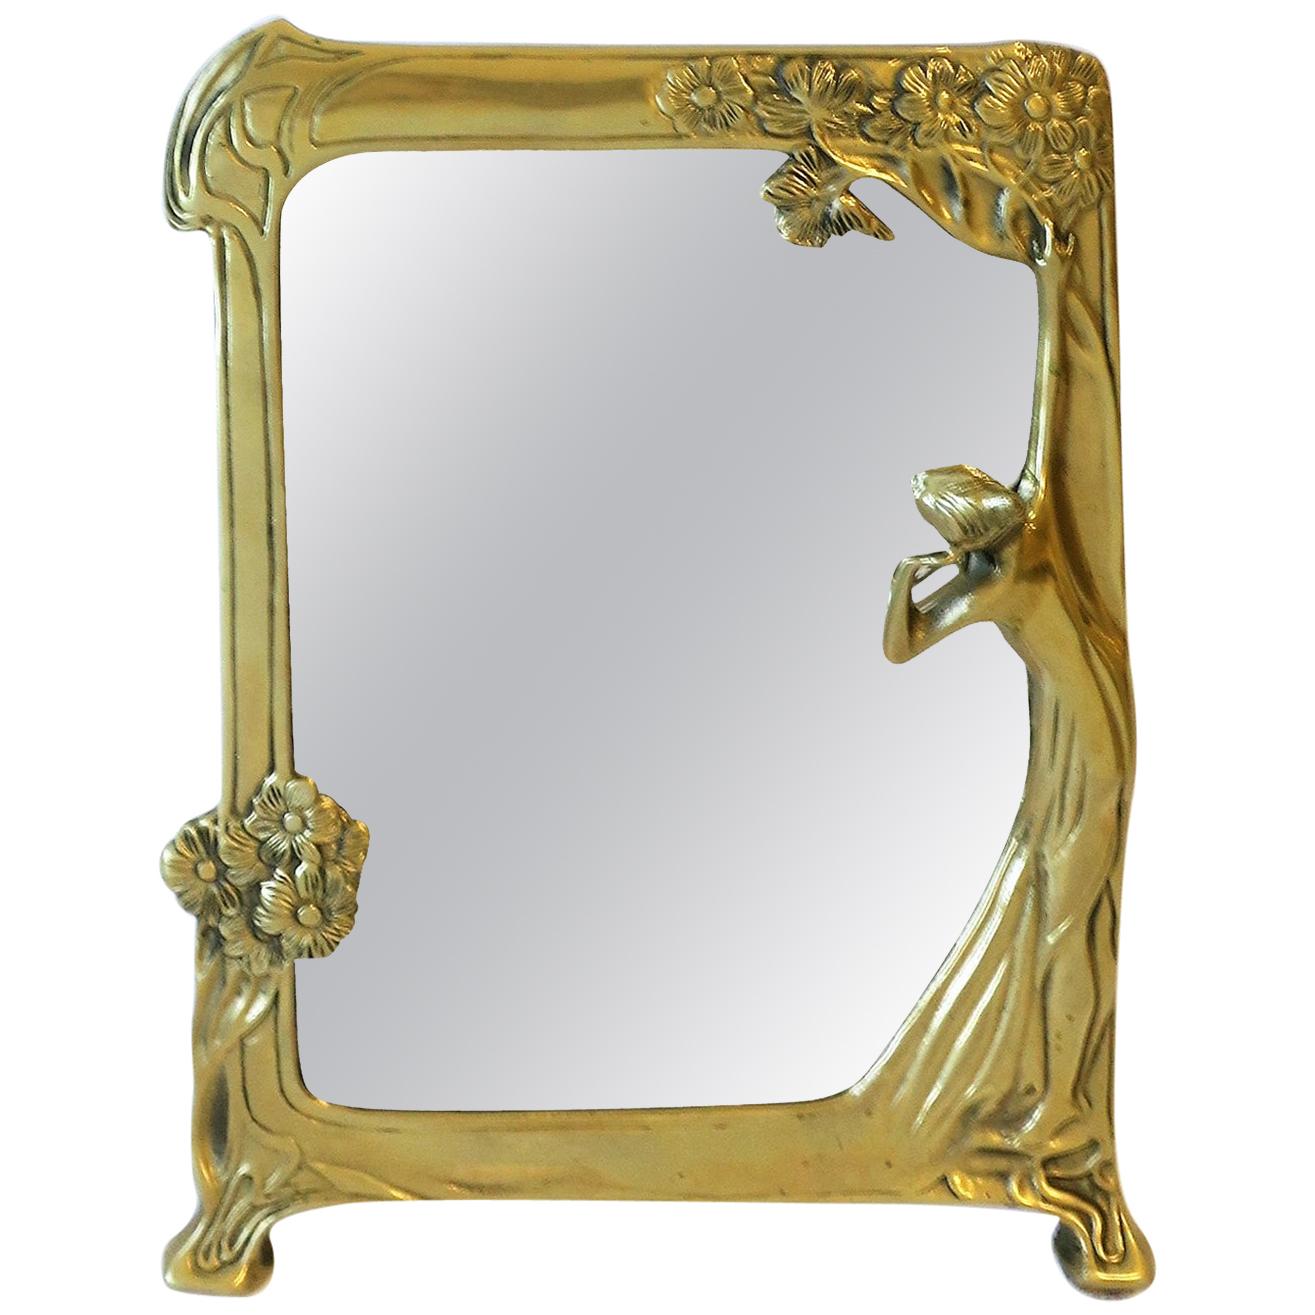 Brass Vanity Mirror in the Art Nouveau Style